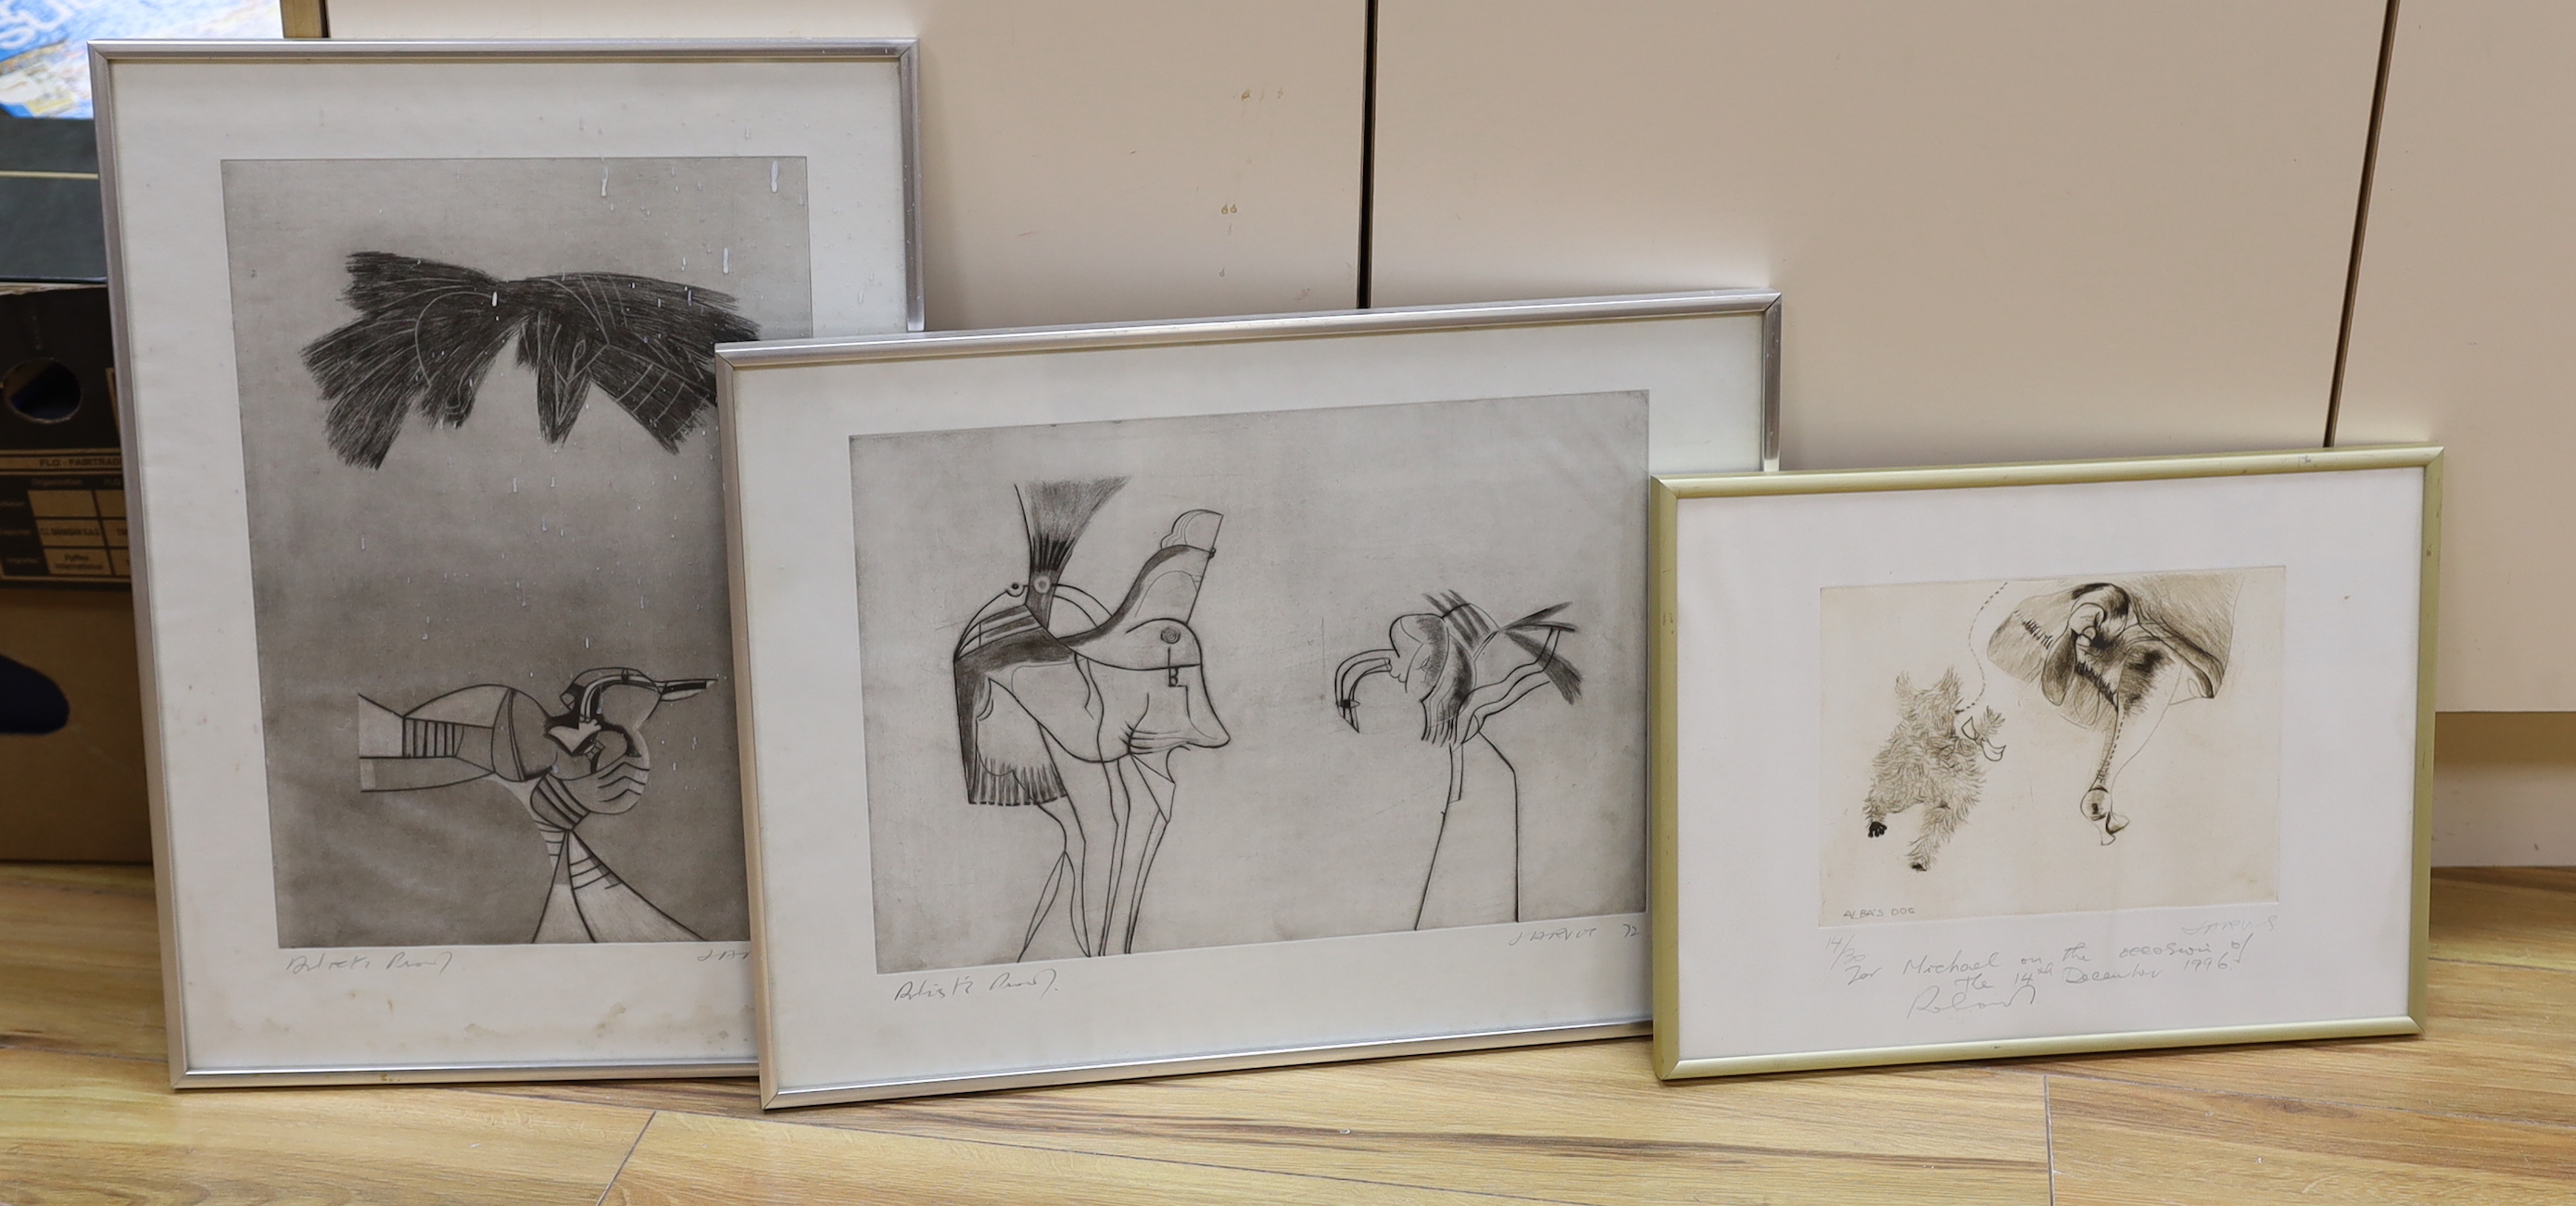 Roland Jarvis (1926-2016), three surreal etchings, 'Alba's Dog' and two artist proof examples, each signed, largest 37 x 51cm